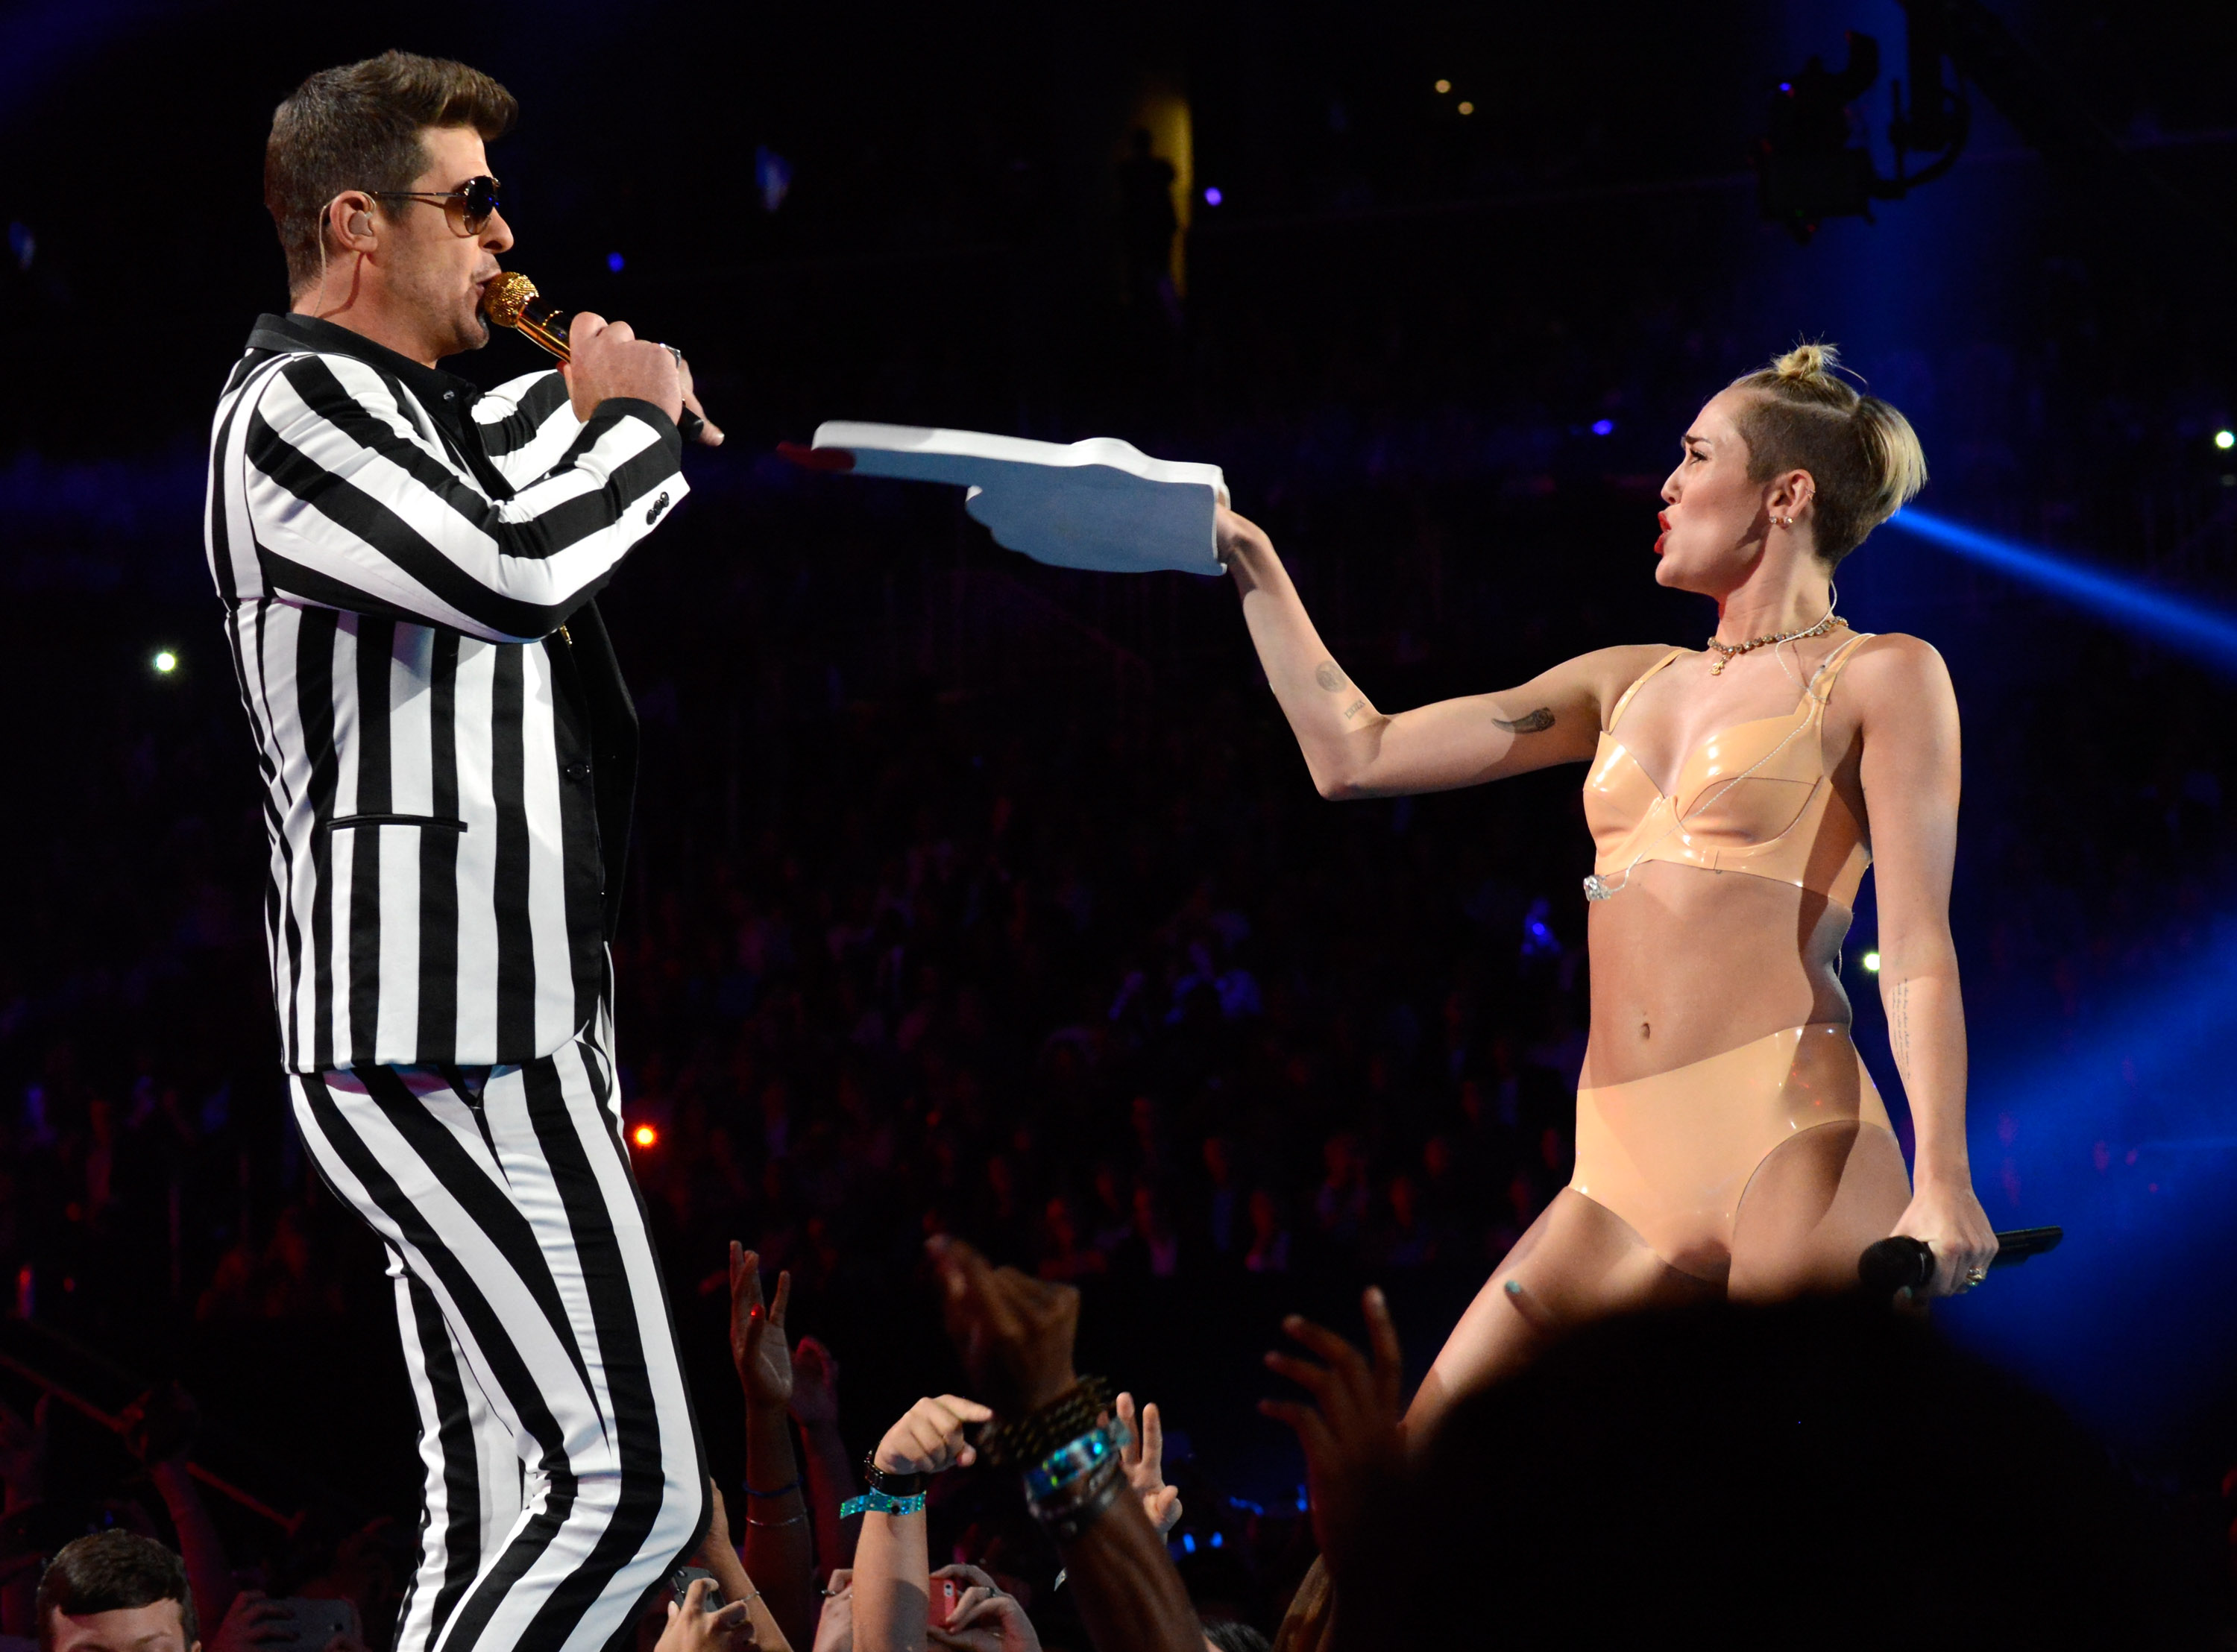 Miley Cyrus pointing a foam finger at Robin Thicke